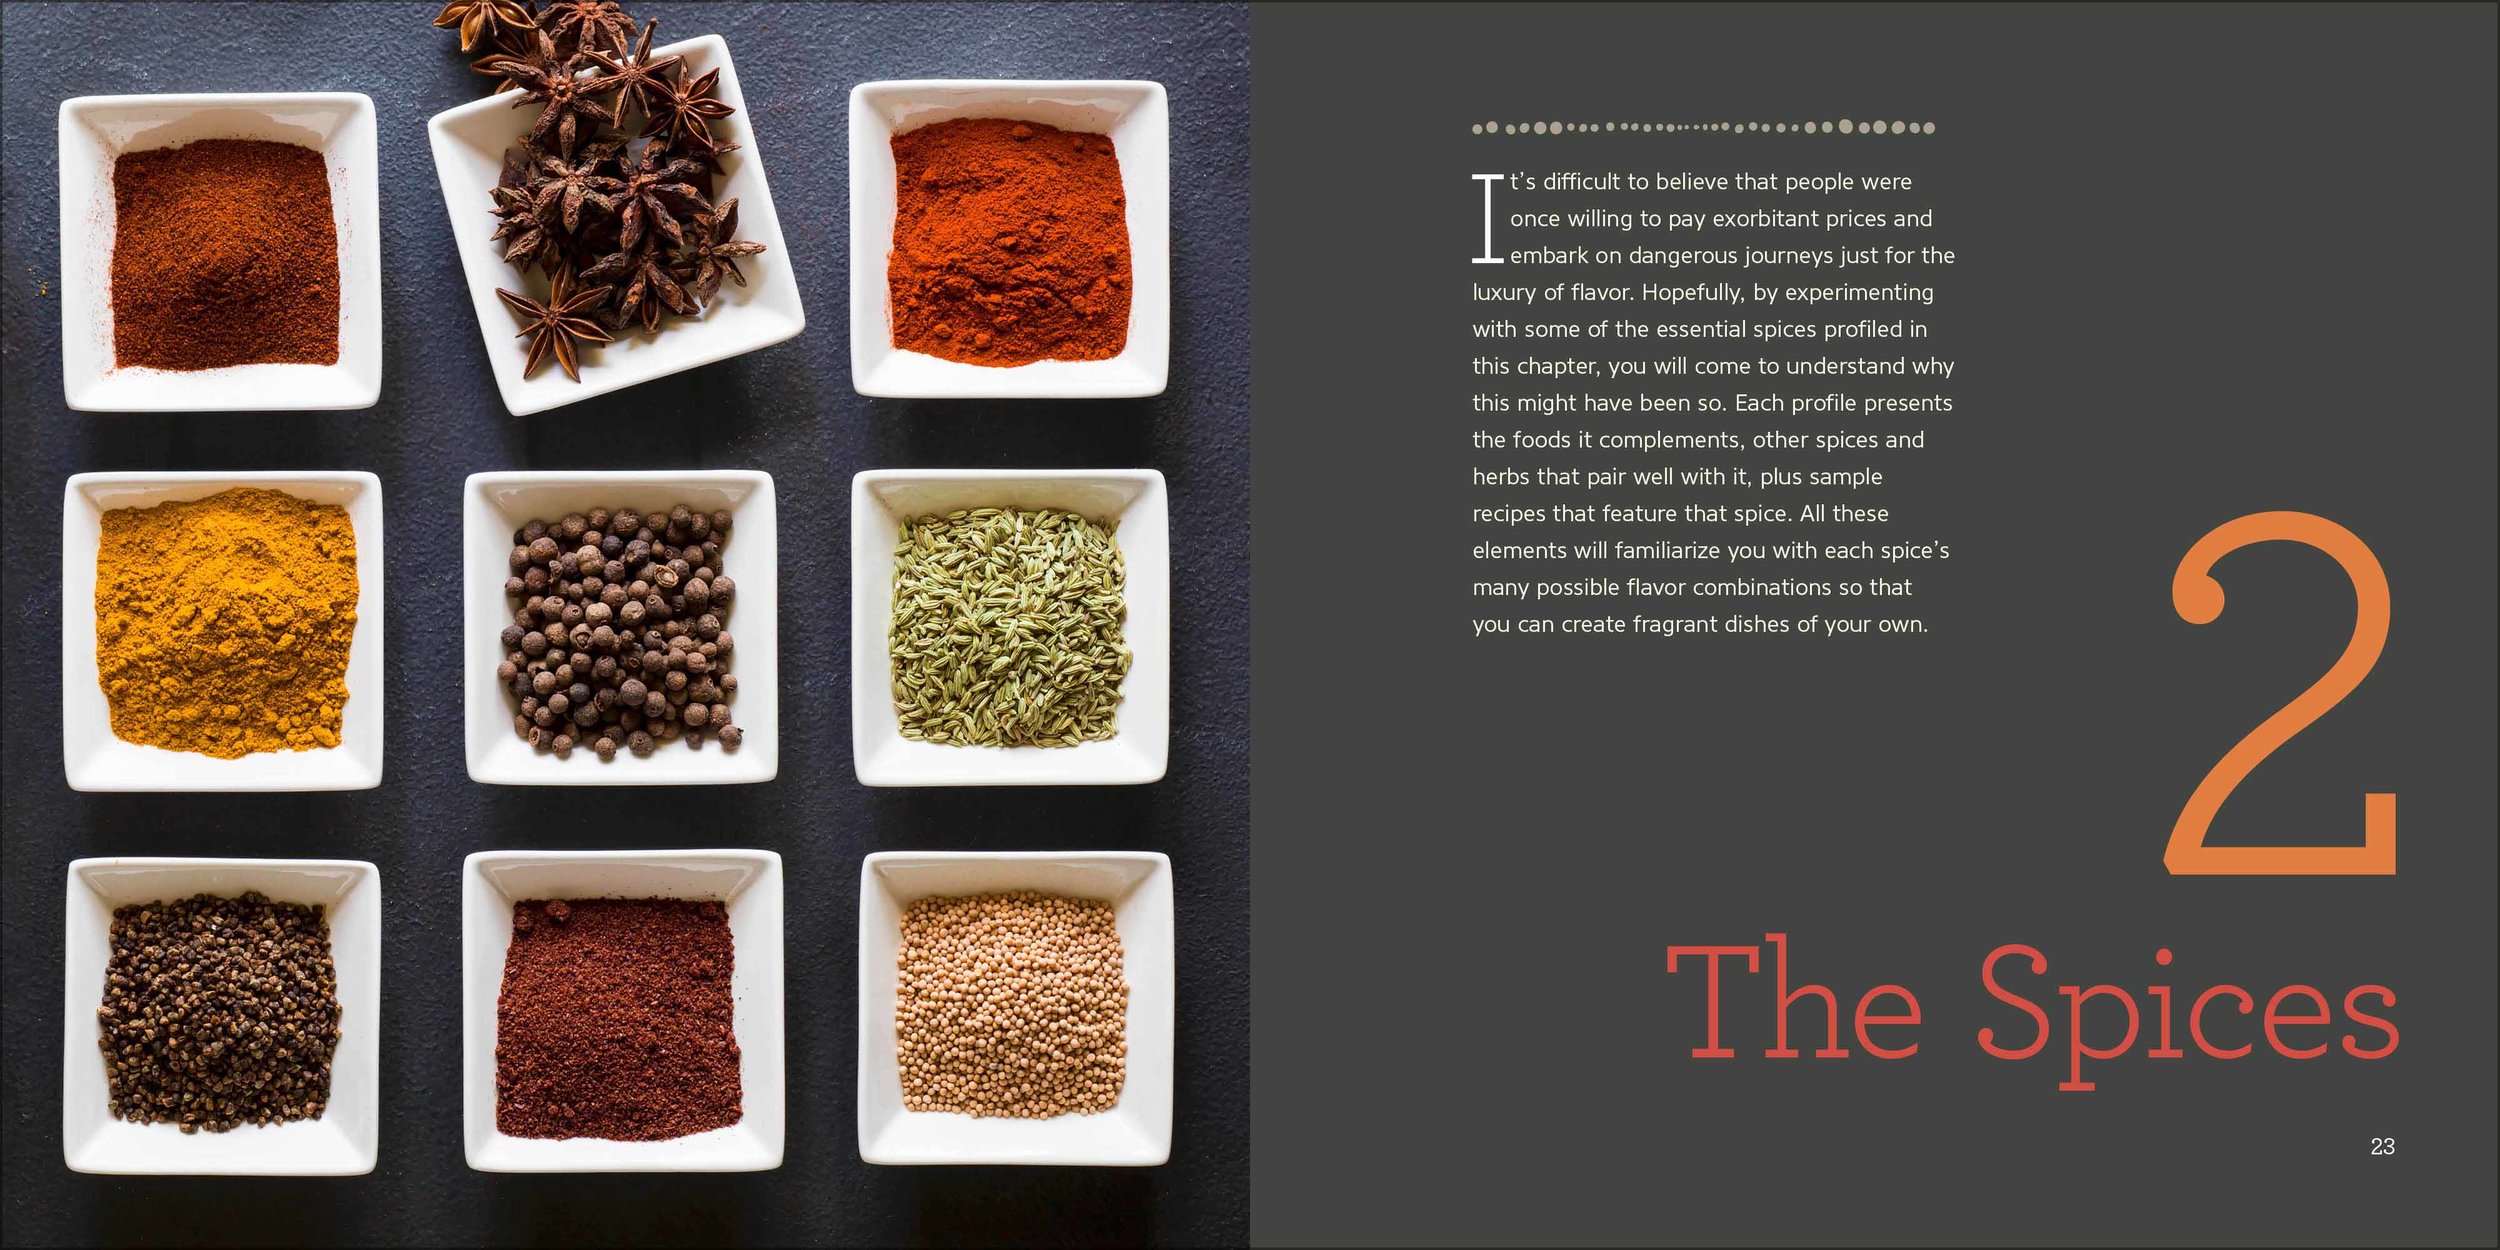 essential-spices-and-herbs-.jpg